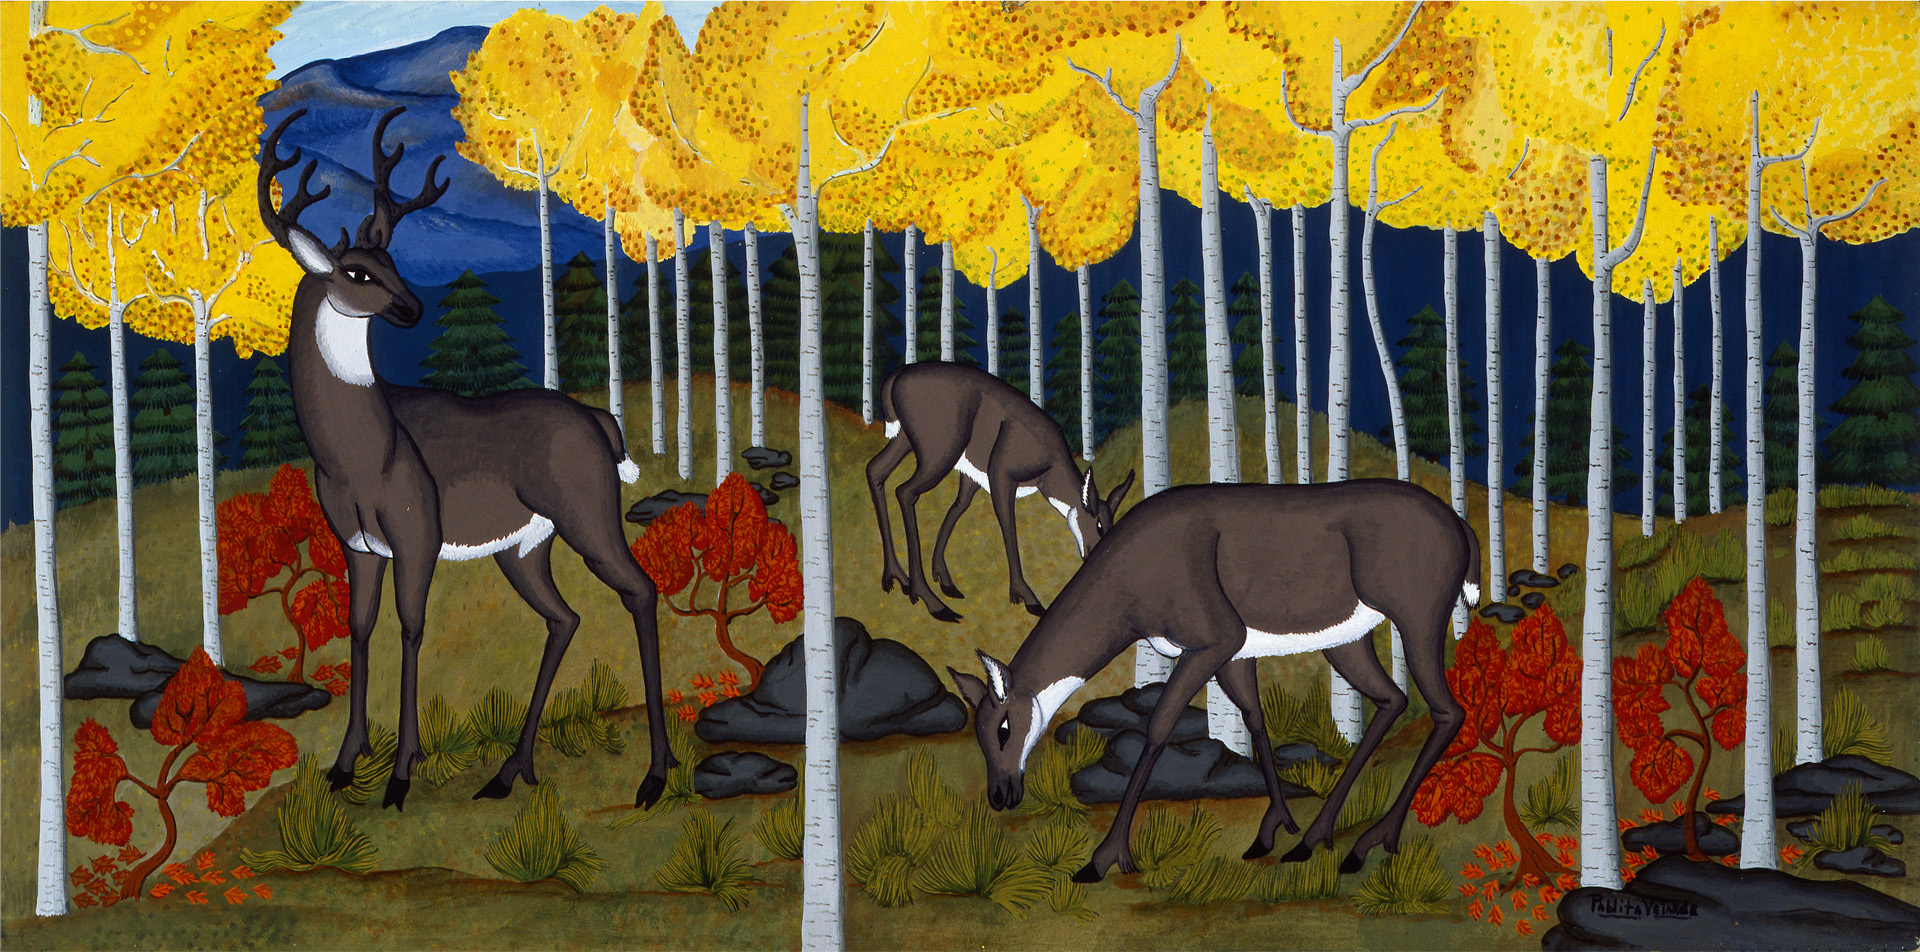 A painting of deer in a forest with yellow aspen trees.